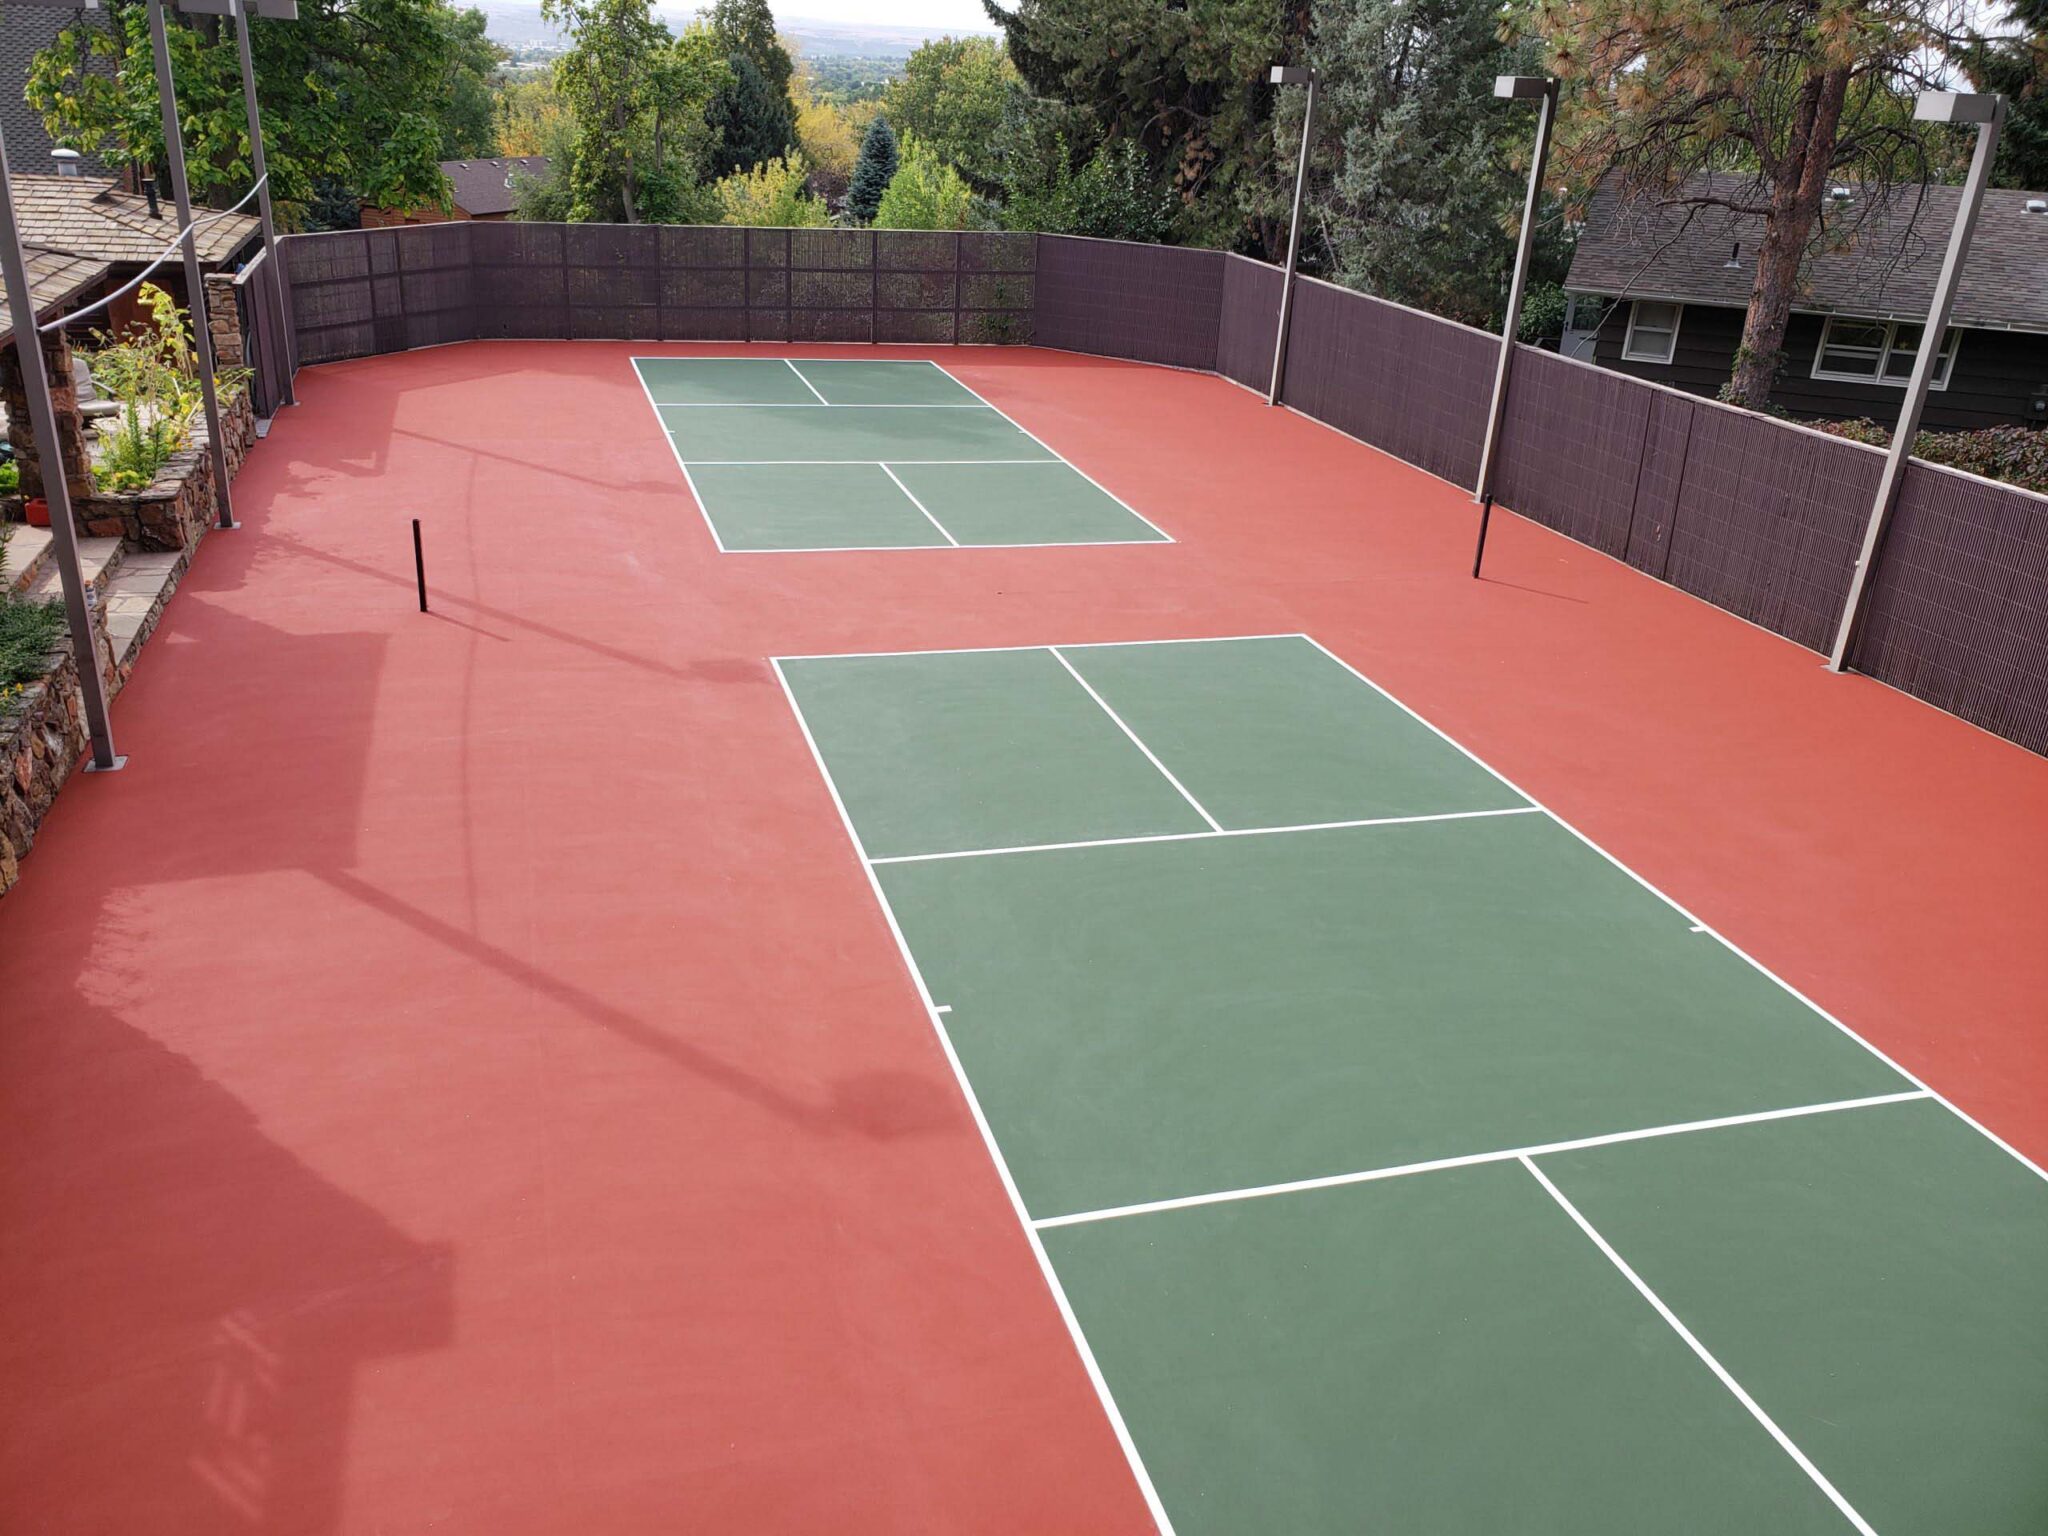 New pickleball courts with red and green colors and white lines.